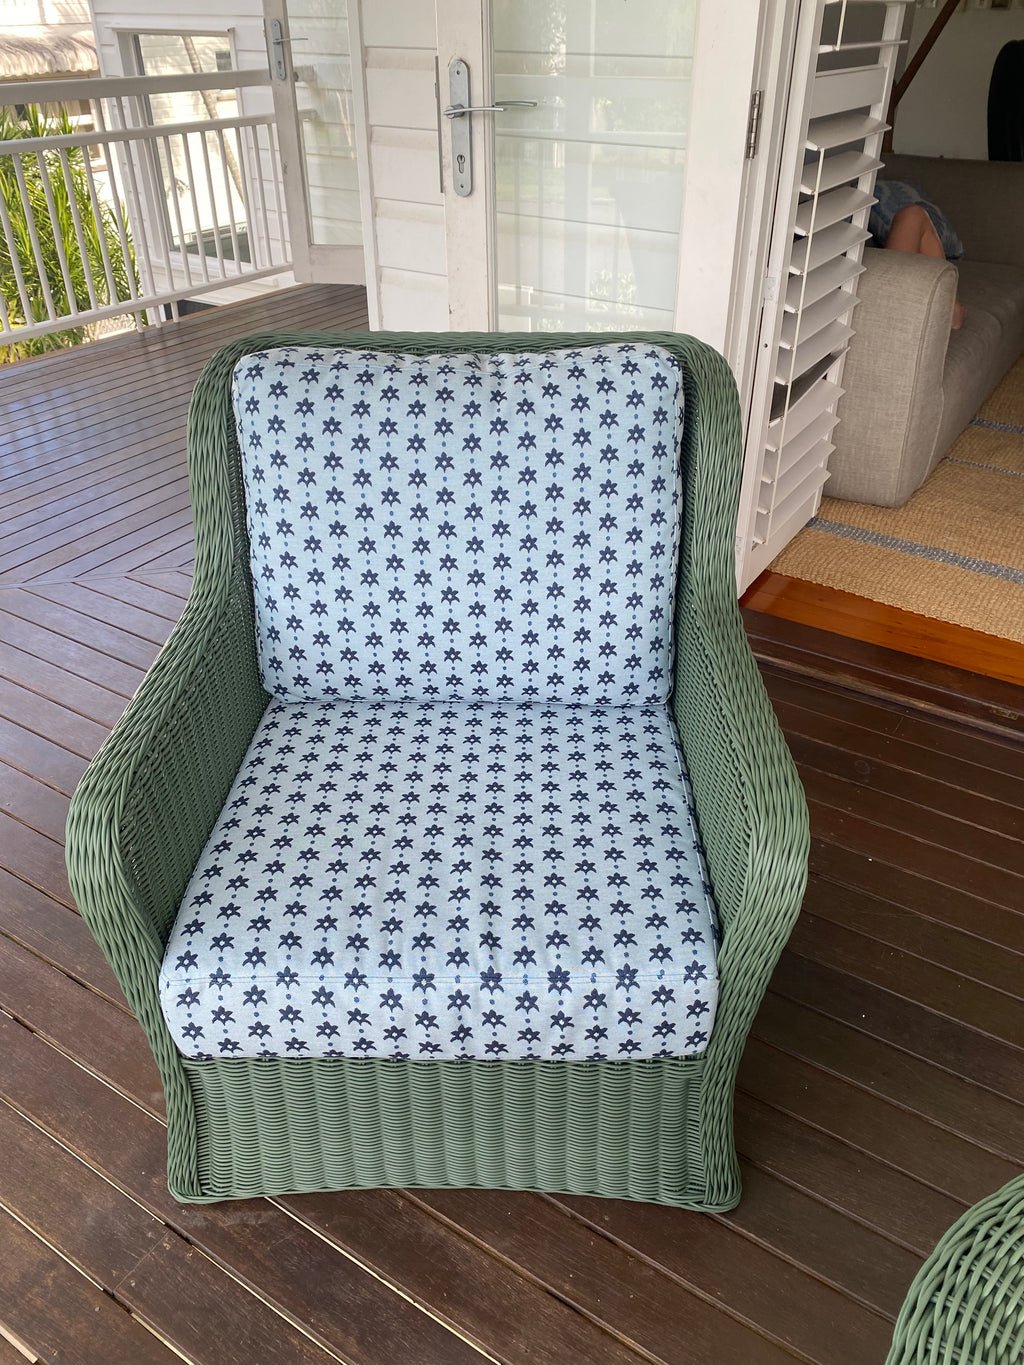 Avalon - Duck Egg and Navy Outdoor Fabric - The Long Weekend Fabric House